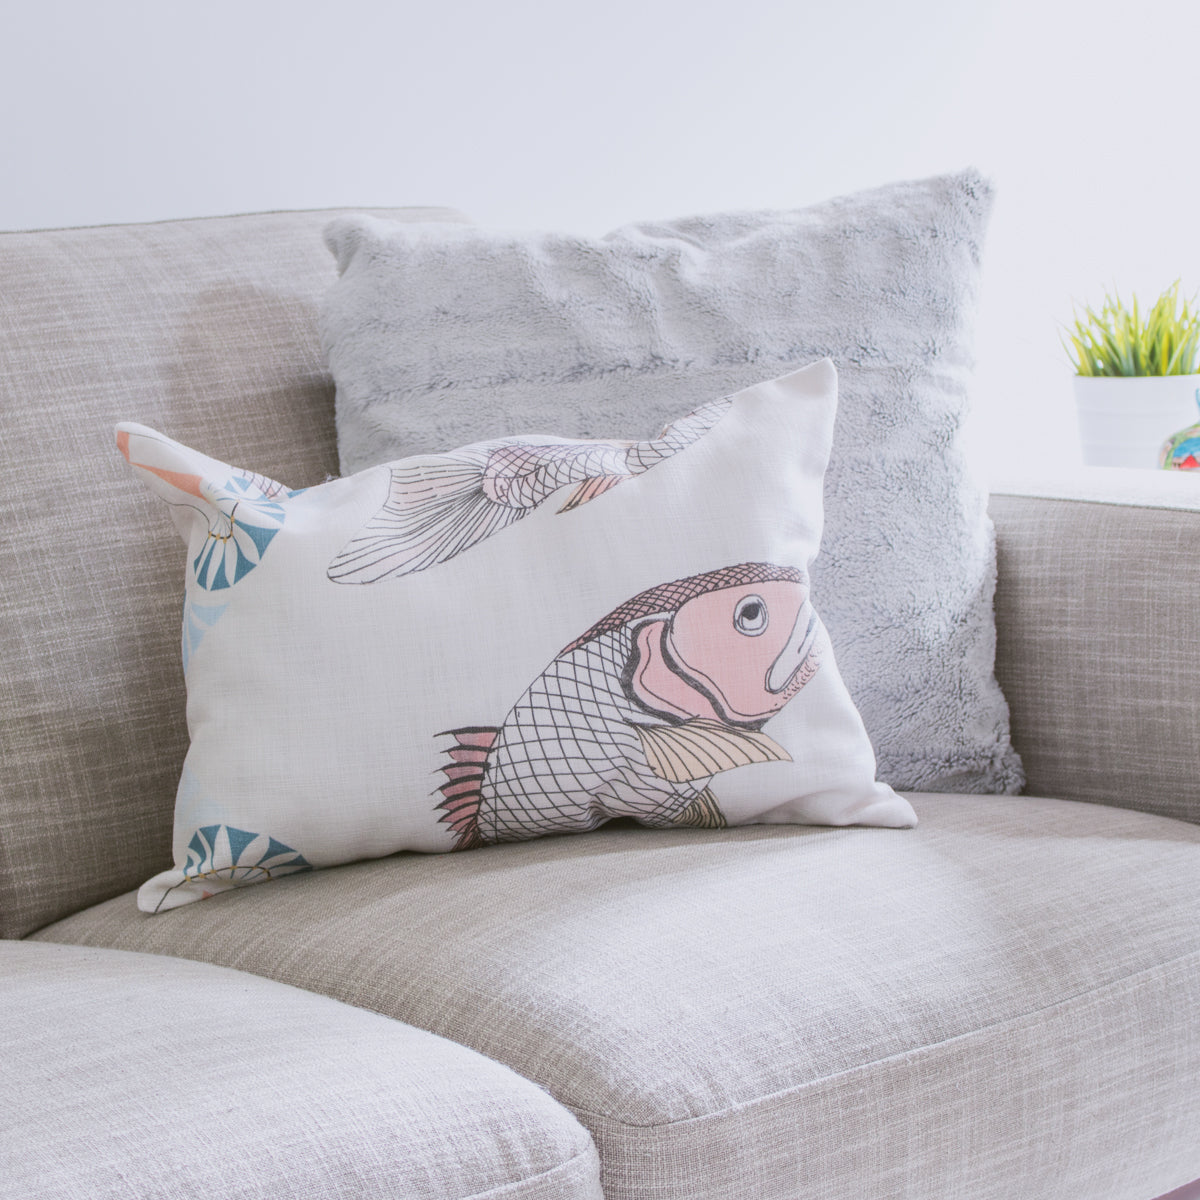 Fish Pillow Cover - George Brown College